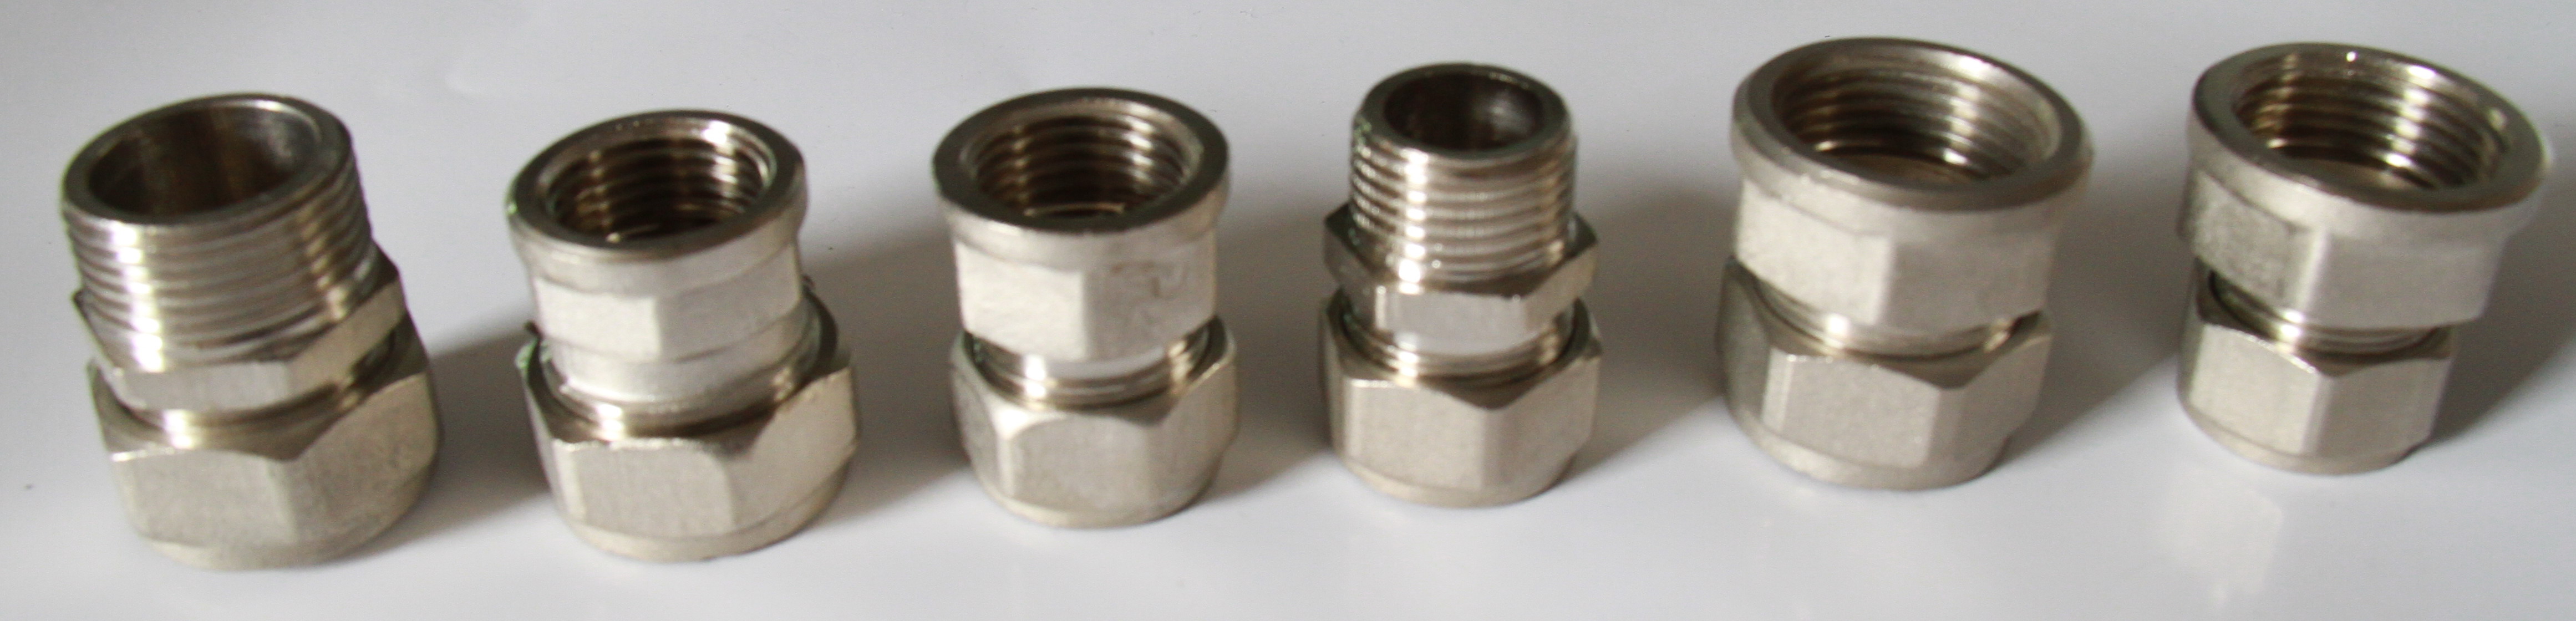 Brass Compression Coupling